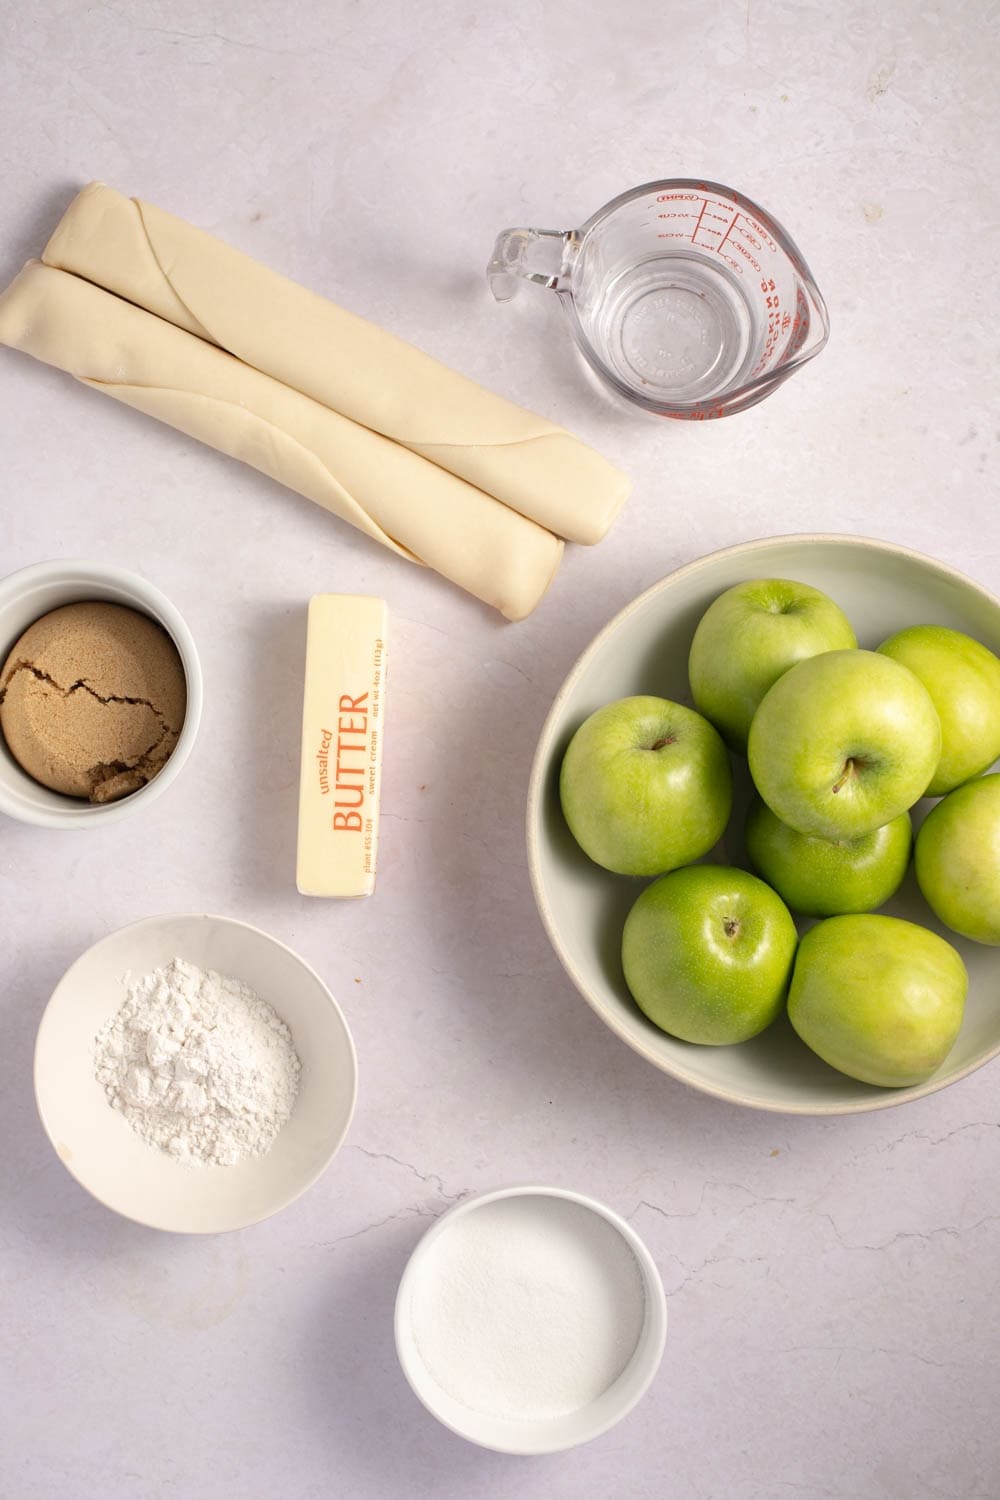 Granny Smith Apple Pie Ingredients - Granny Smith Apples, Butter, Flour, Sugar, Water and Double-Crust Pie Pastry